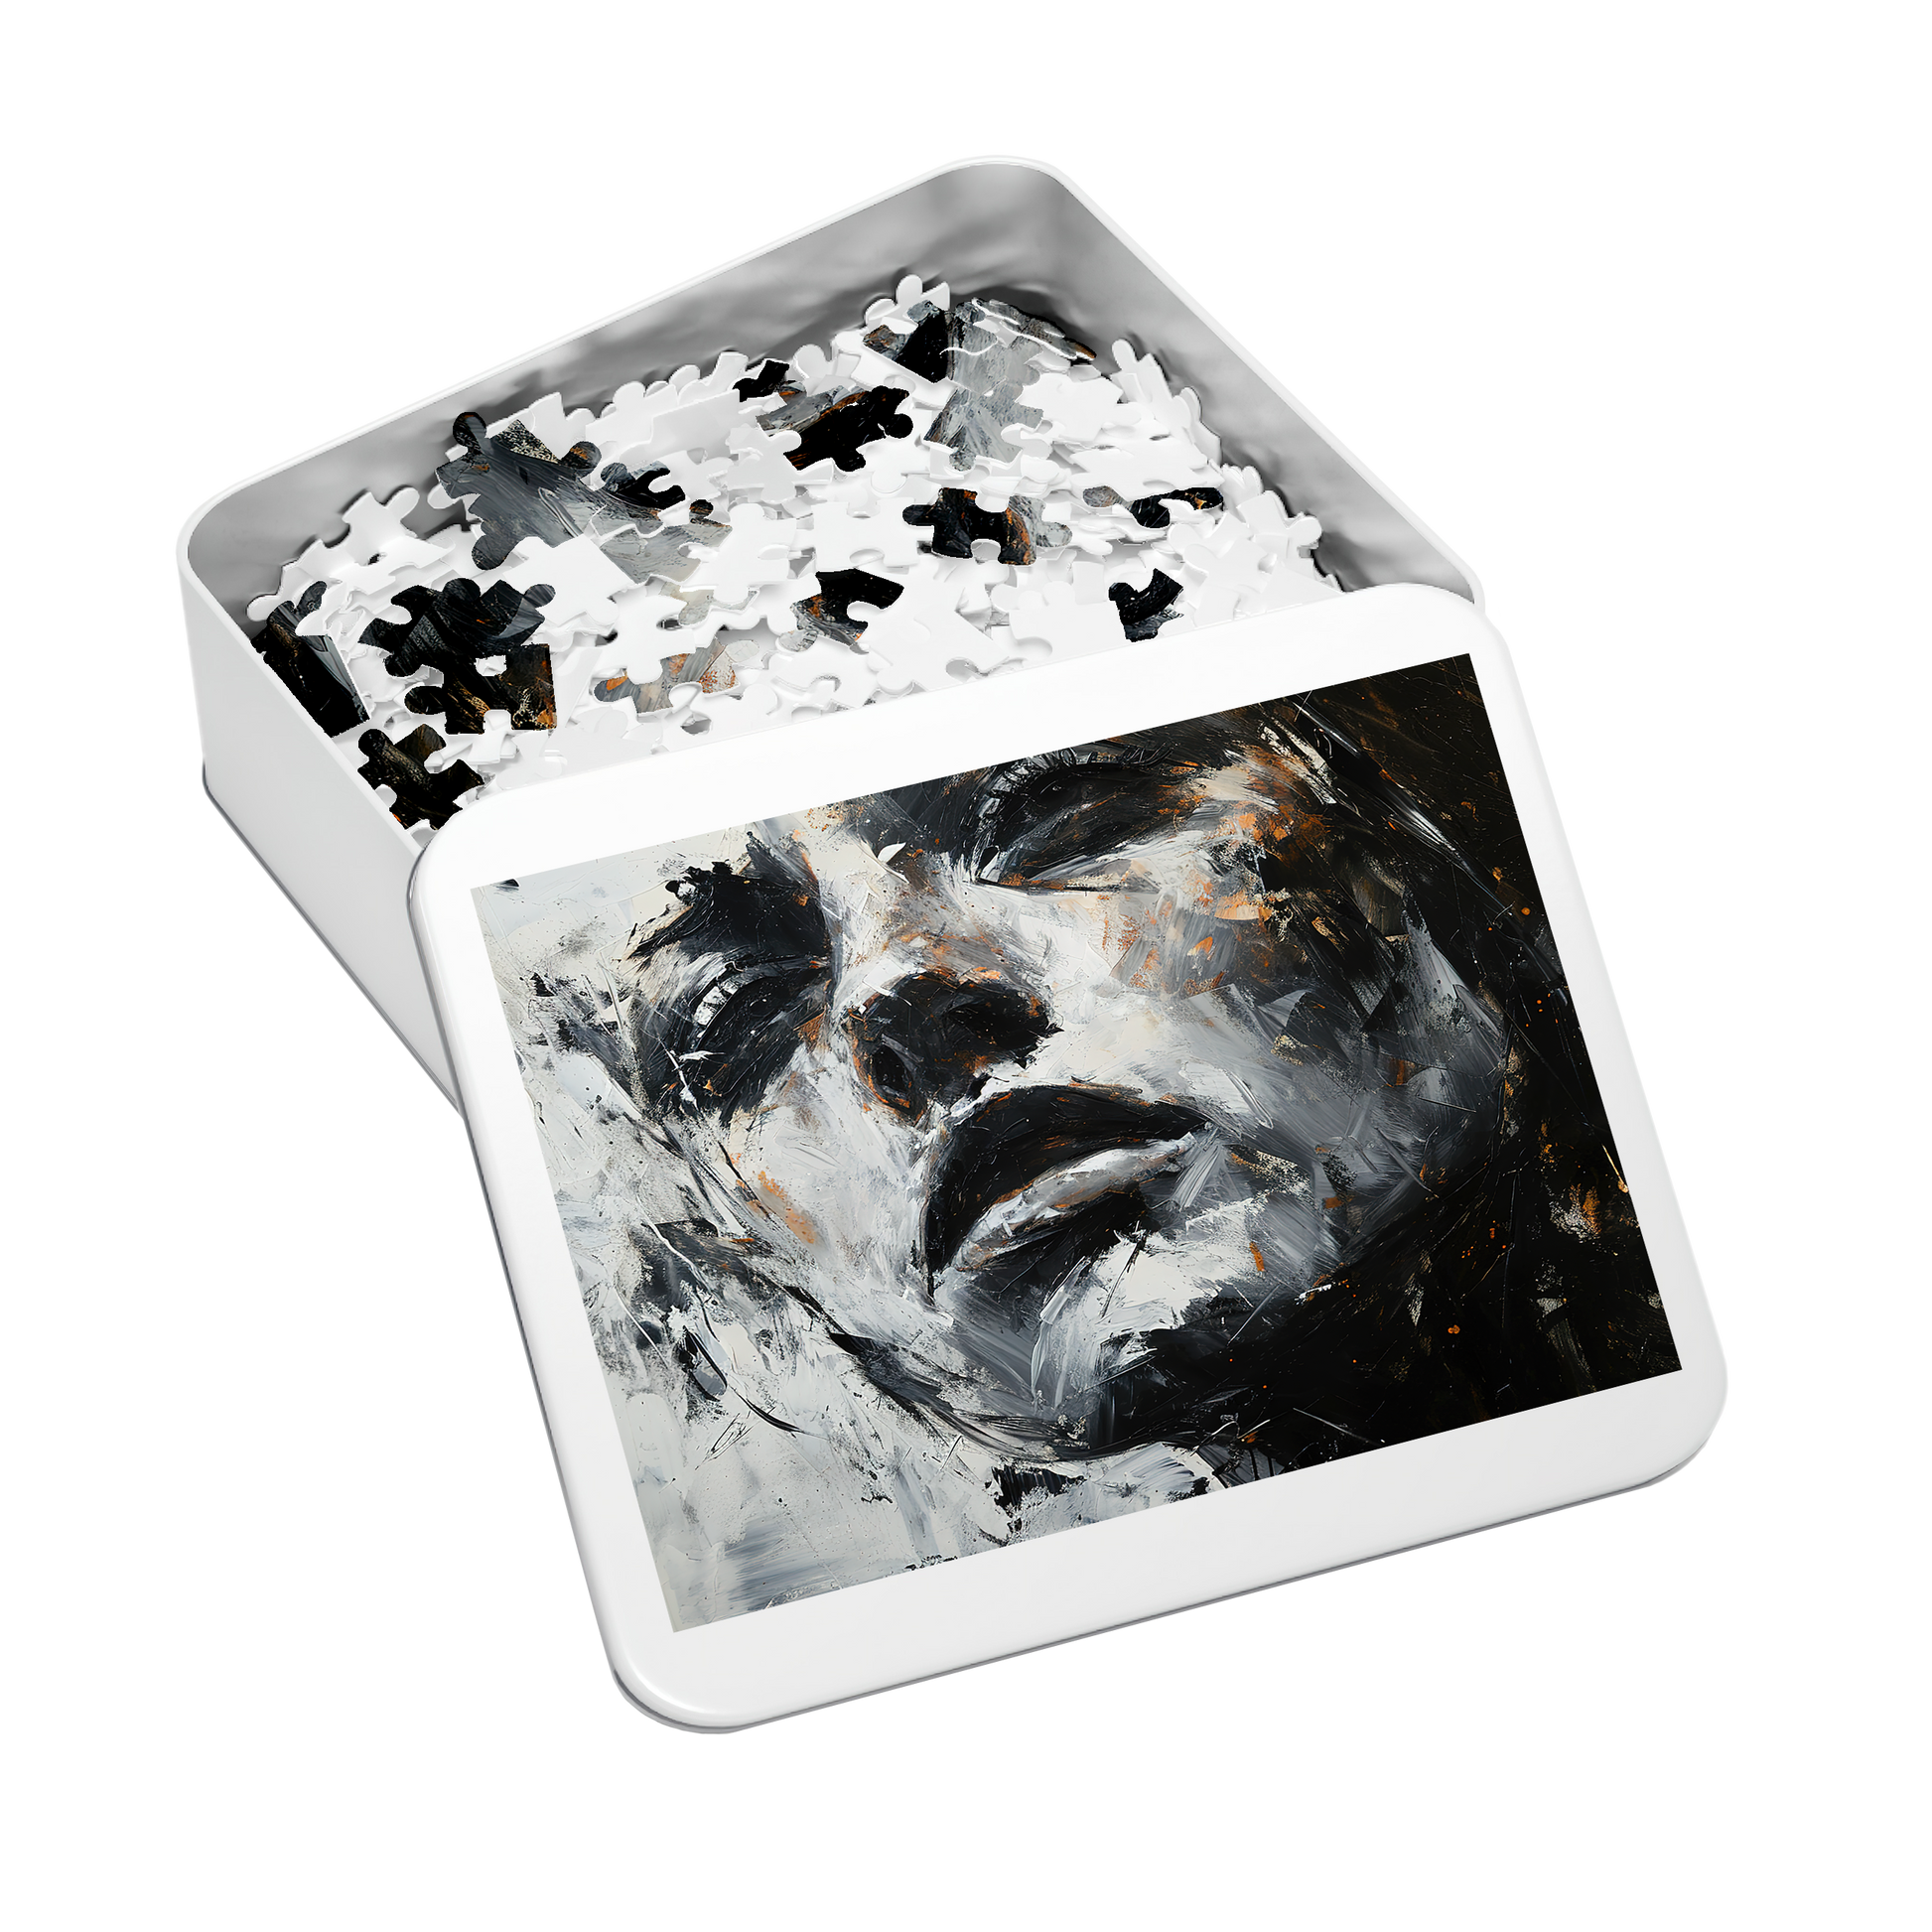 Judgement - Premium Jigsaw Puzzle - Black and White, Abstract Profile, Modern Art, Decore - Multiple Sizes Available